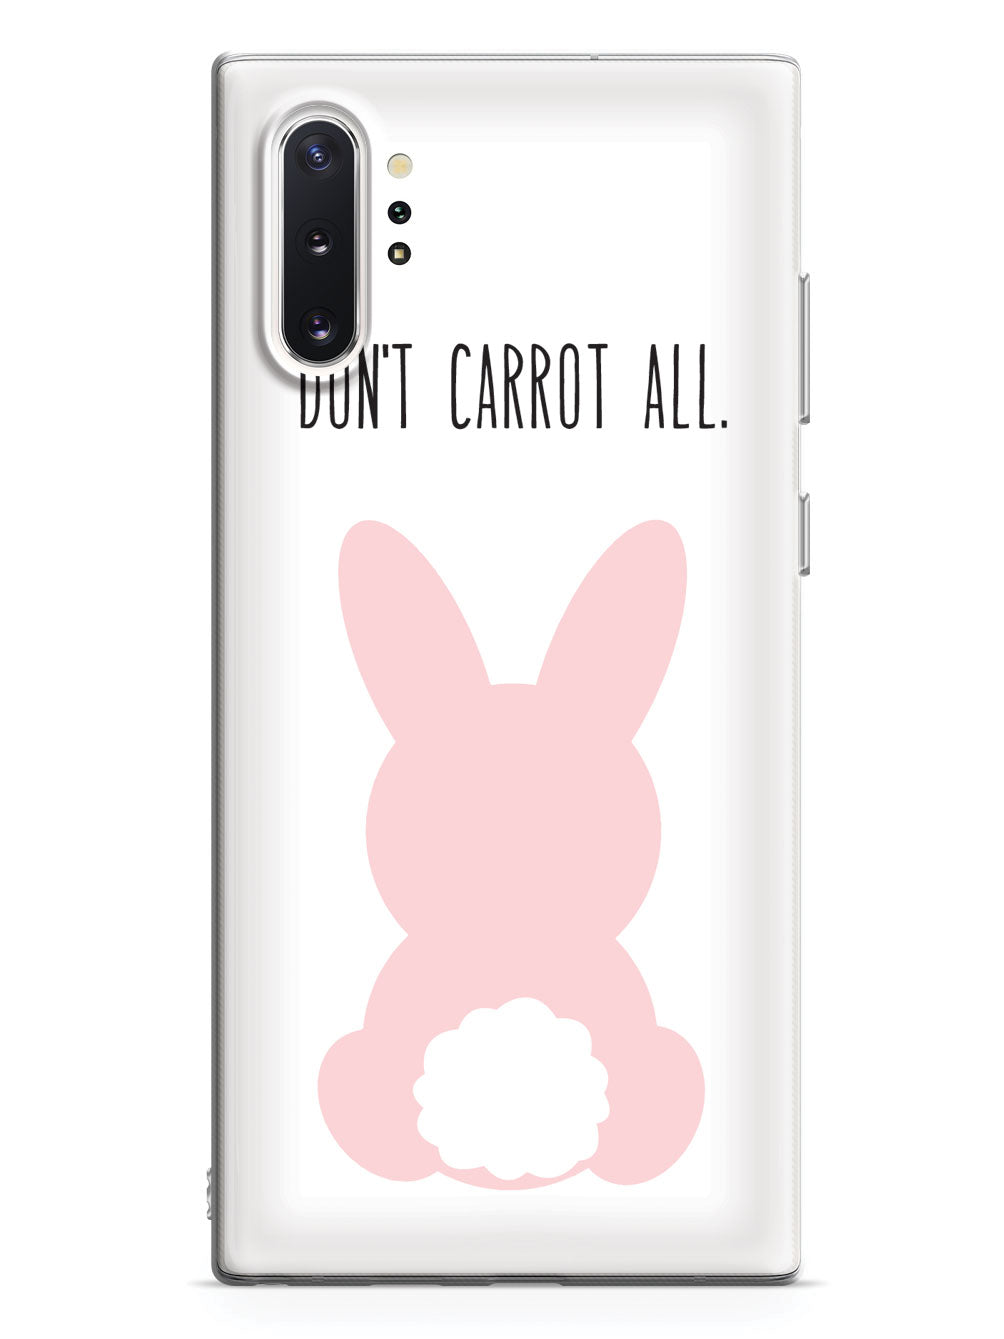 Don't Carrot All - Bunny Case